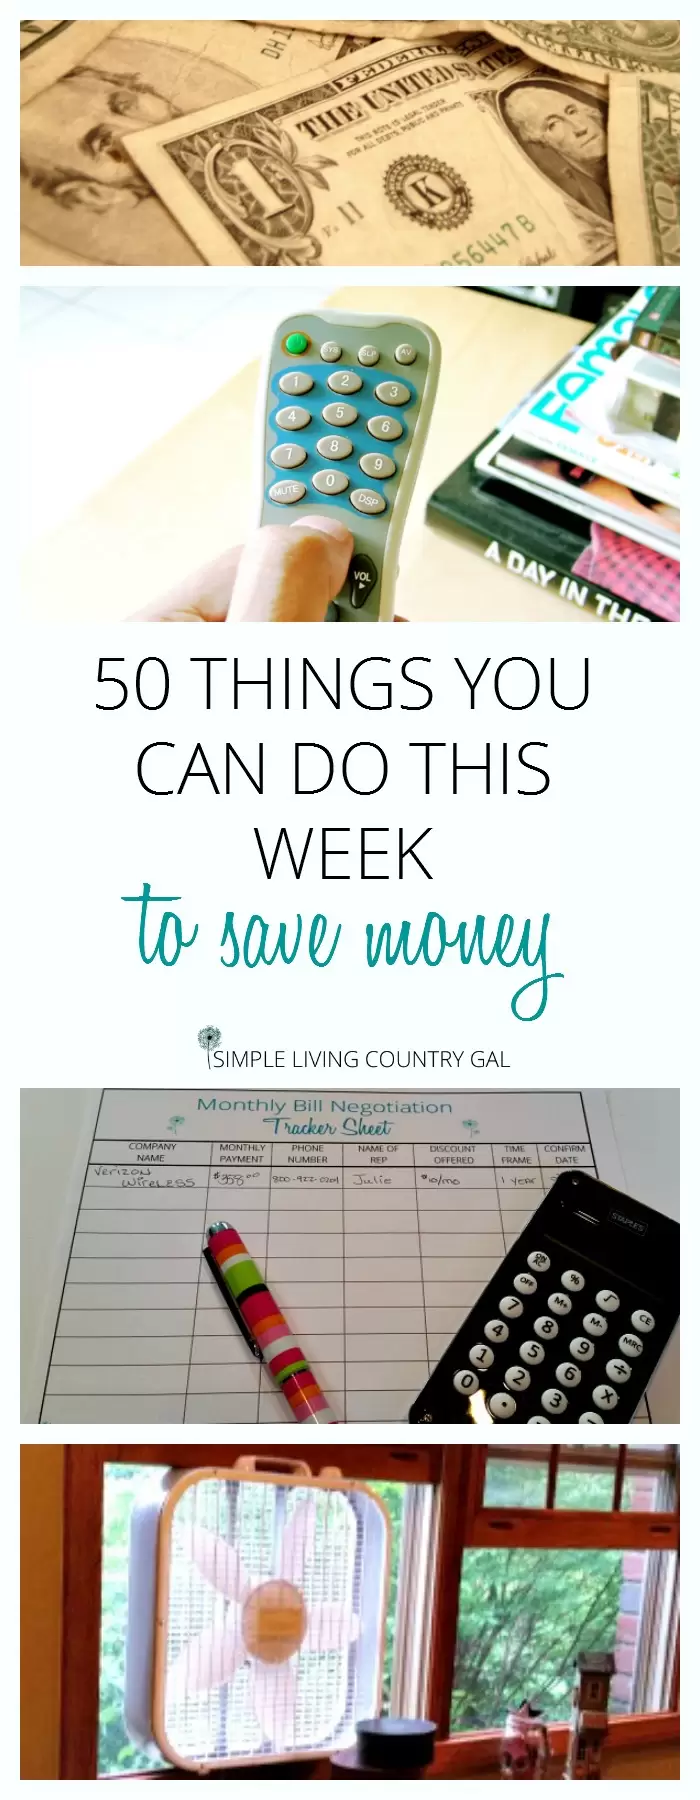 50 things you can do to save money this week. 